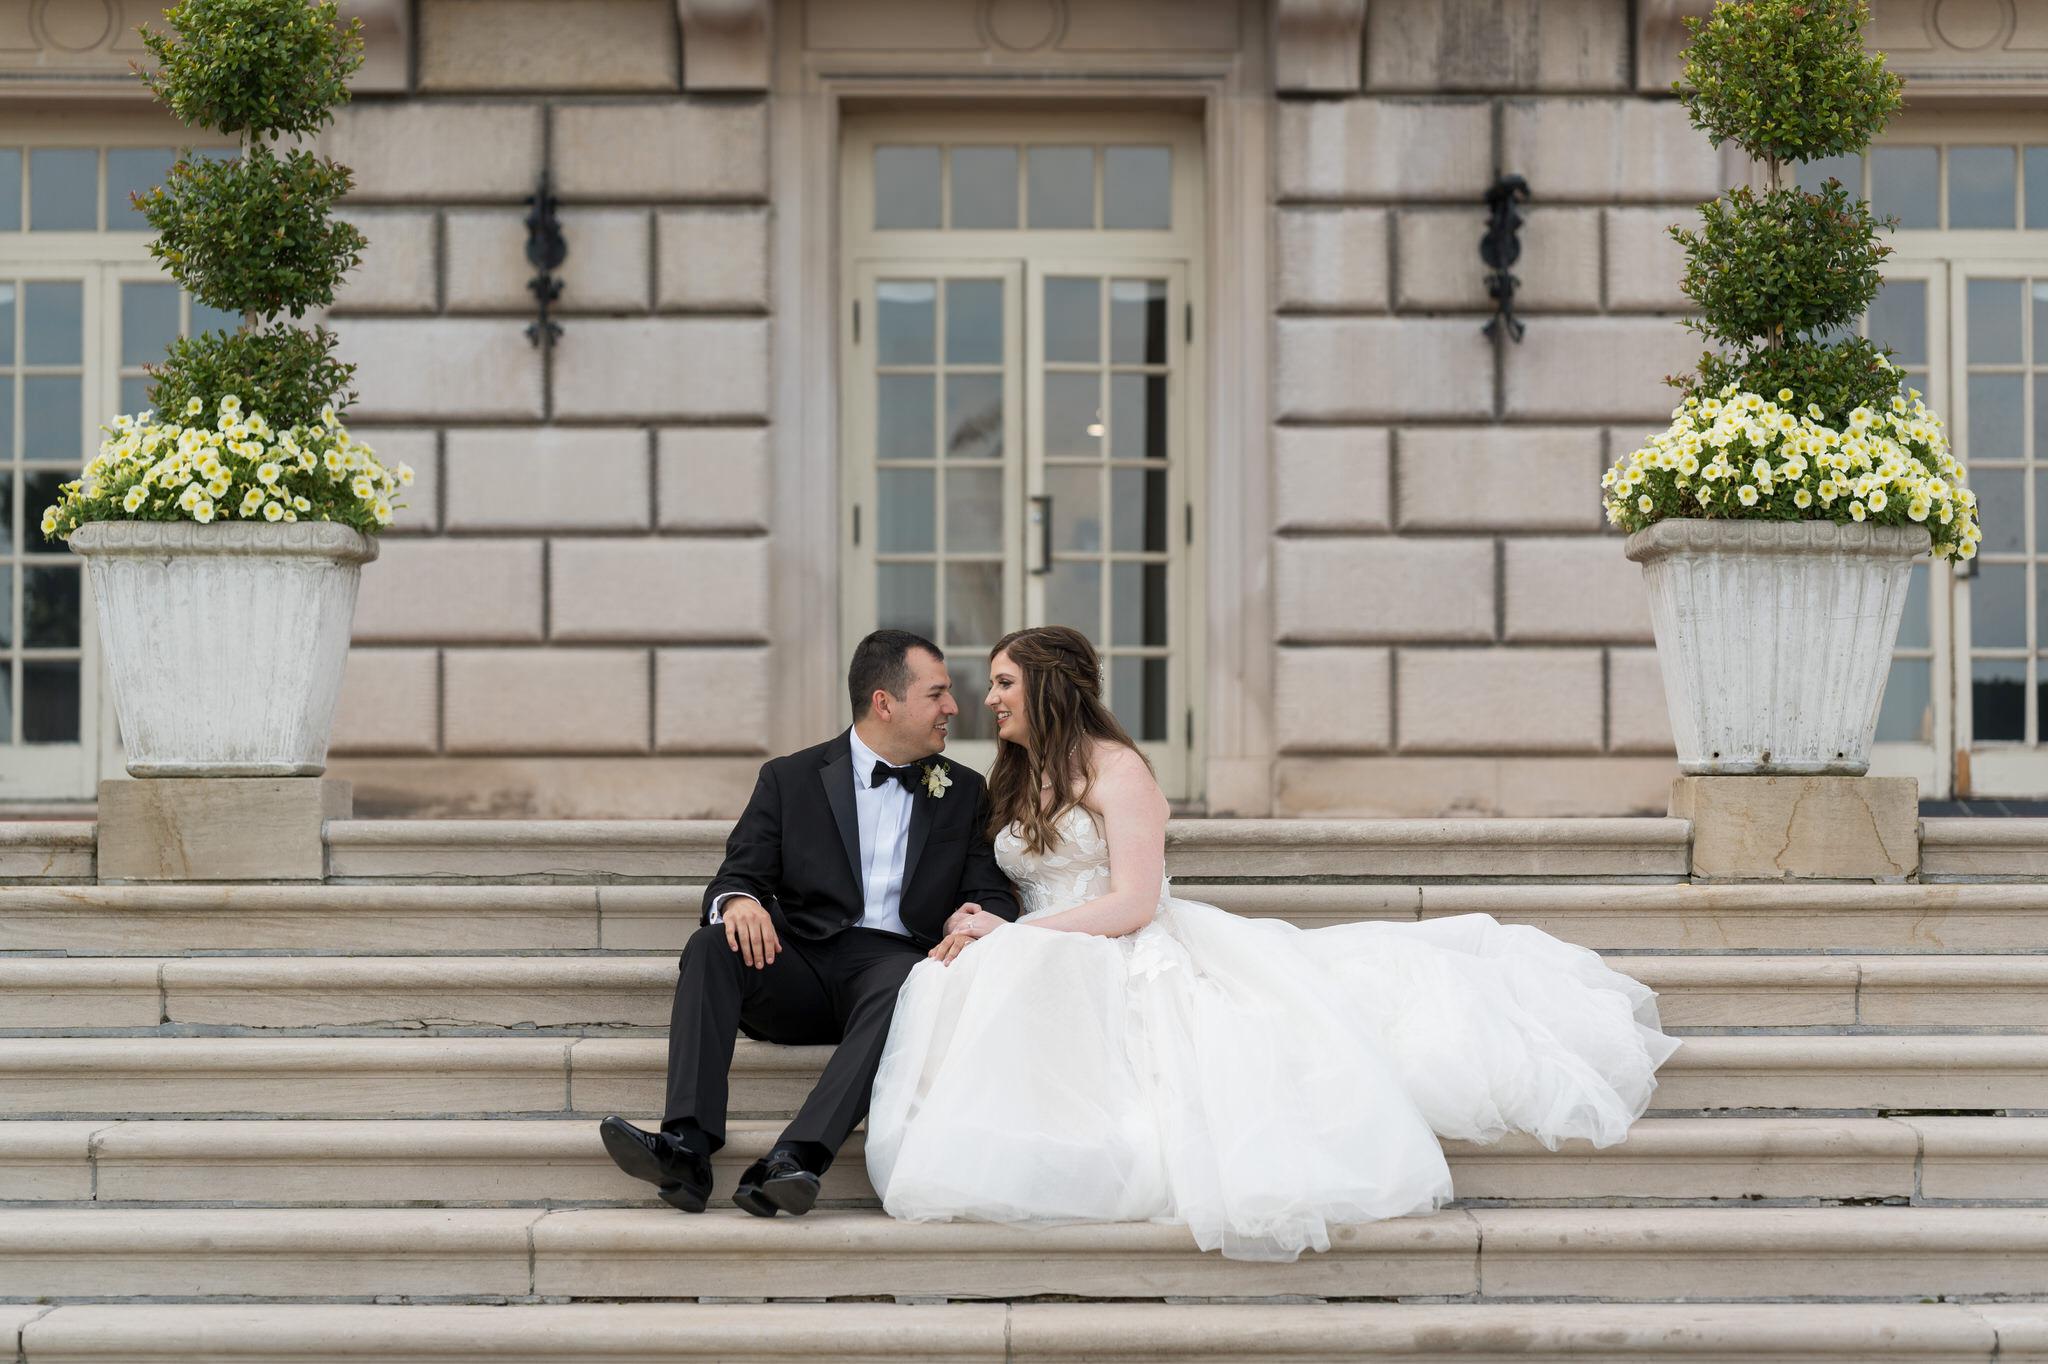 A bride and groom sit on steps during their wedding at the War Memorial.  